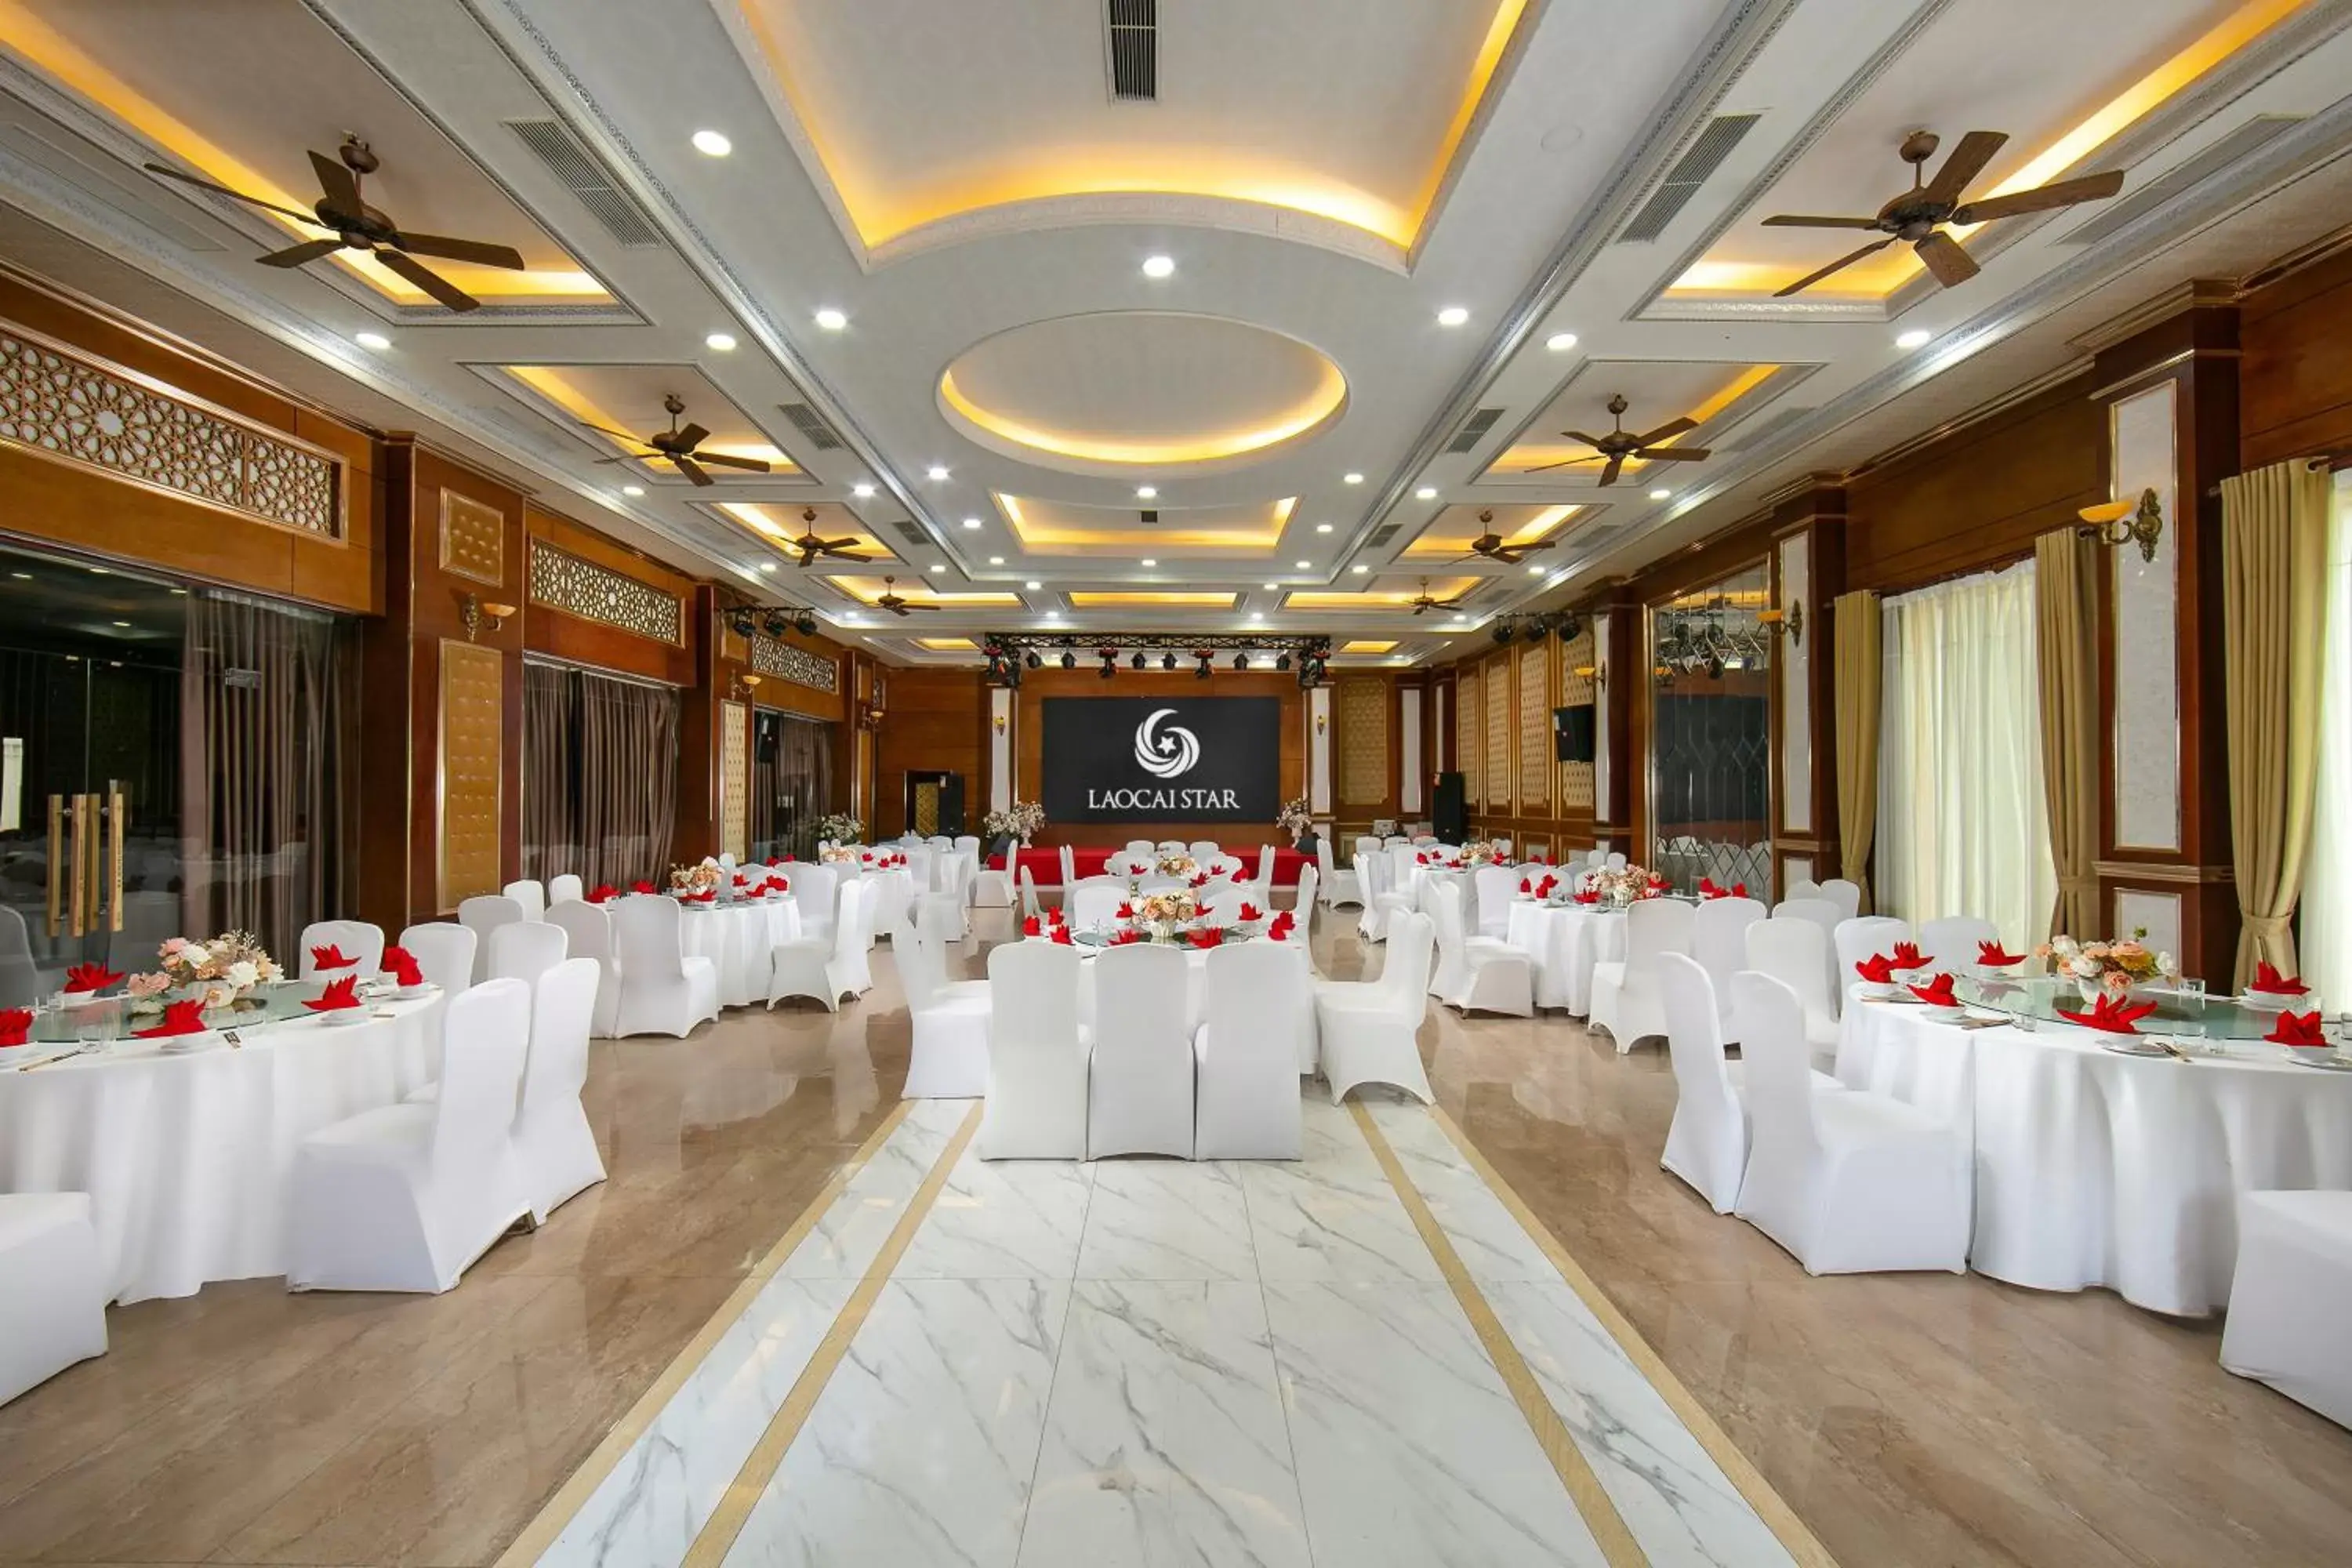 Meeting/conference room, Banquet Facilities in Lao Cai Star Hotel